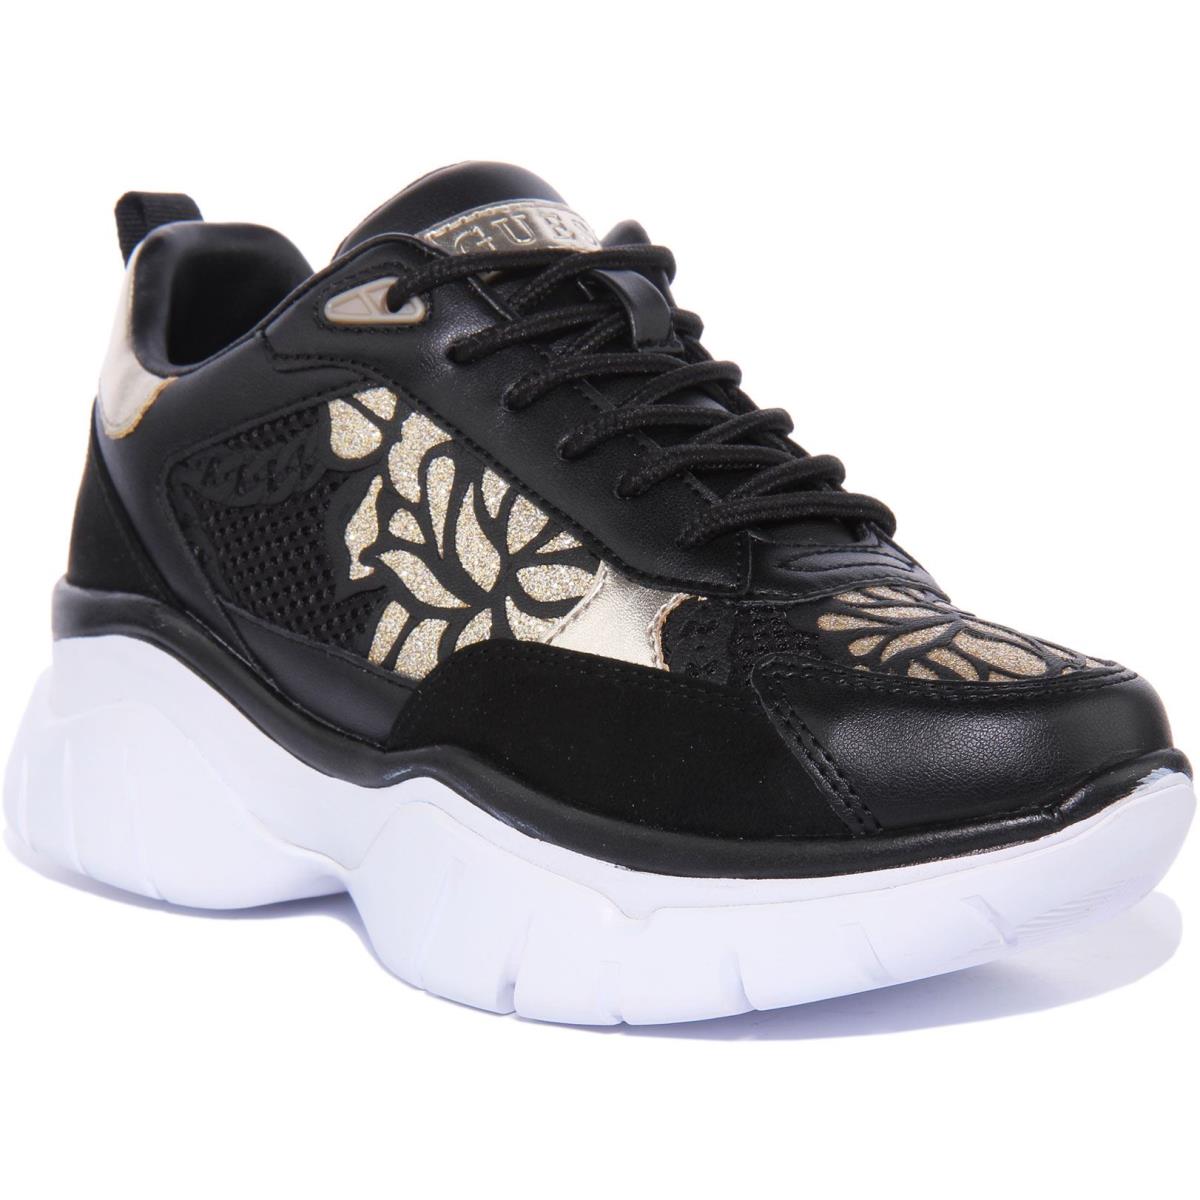 Guess Fl5Dr2Fab12 Womens Lace Up Sneakers with Floral Art Size US 5 - 11 BLACK GOLD